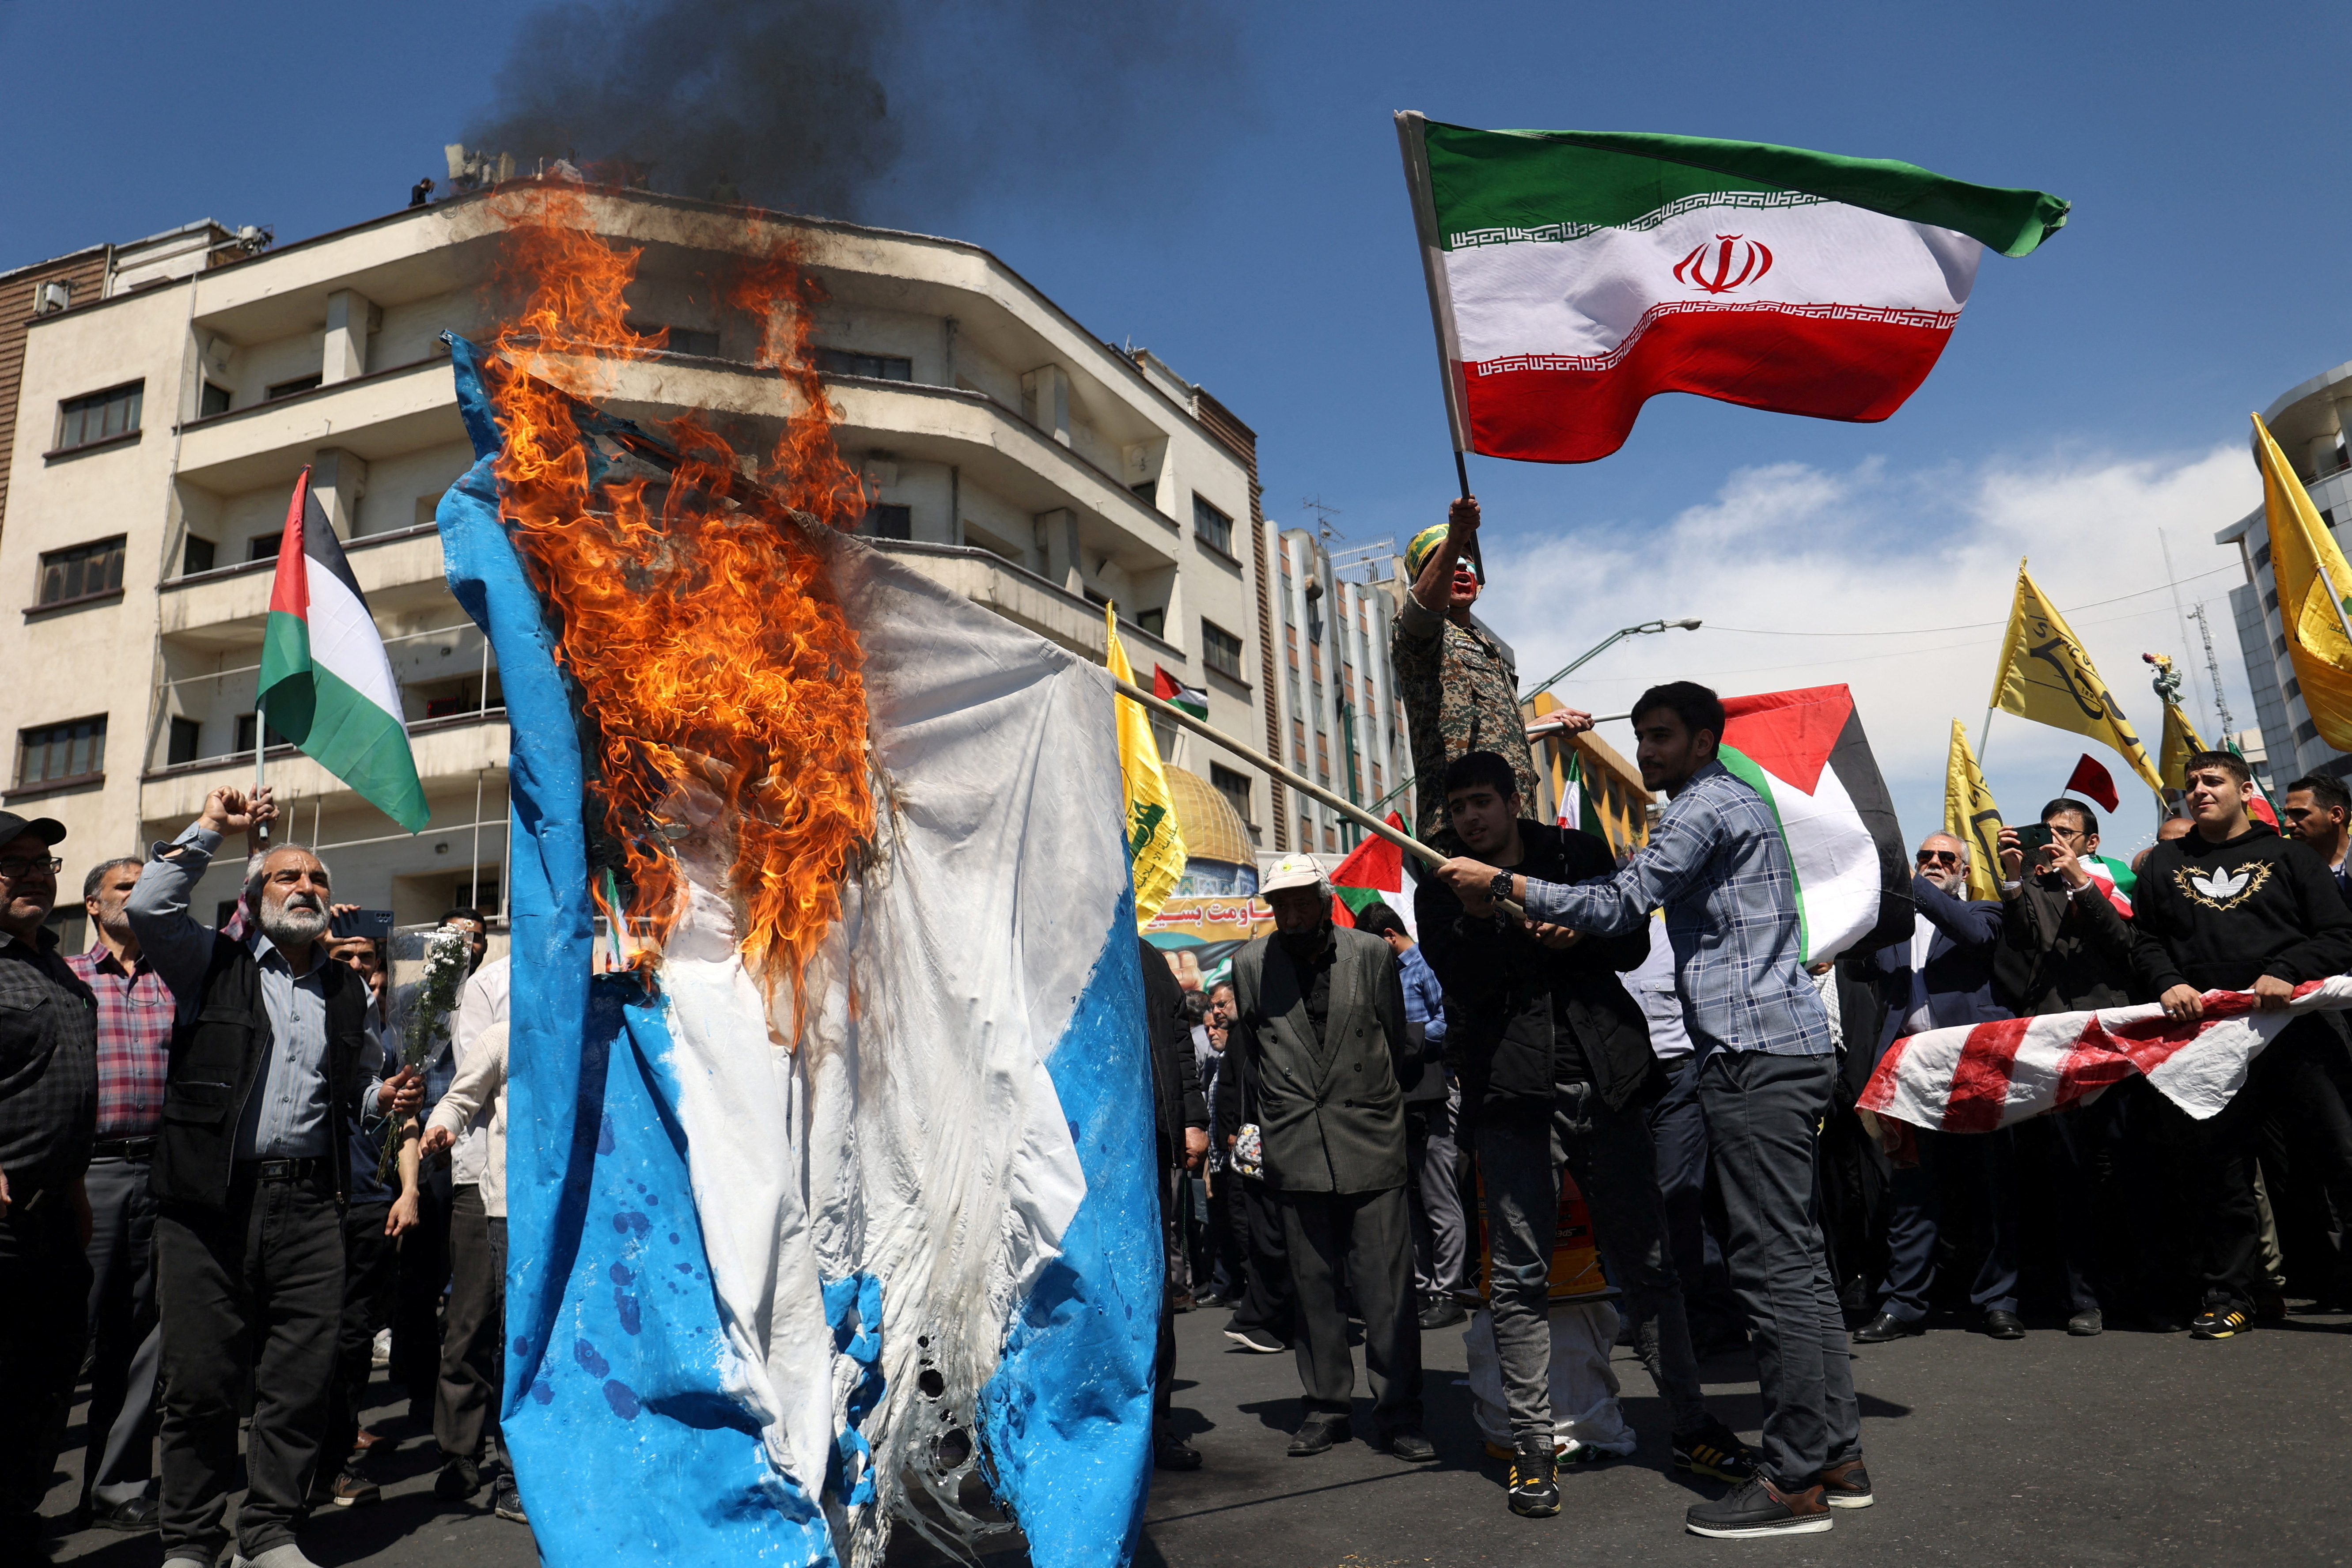 Iranians attend a rally marking Quds Day and the funeral of members of the Islamic Revolutionary Guard Corps, in Tehran